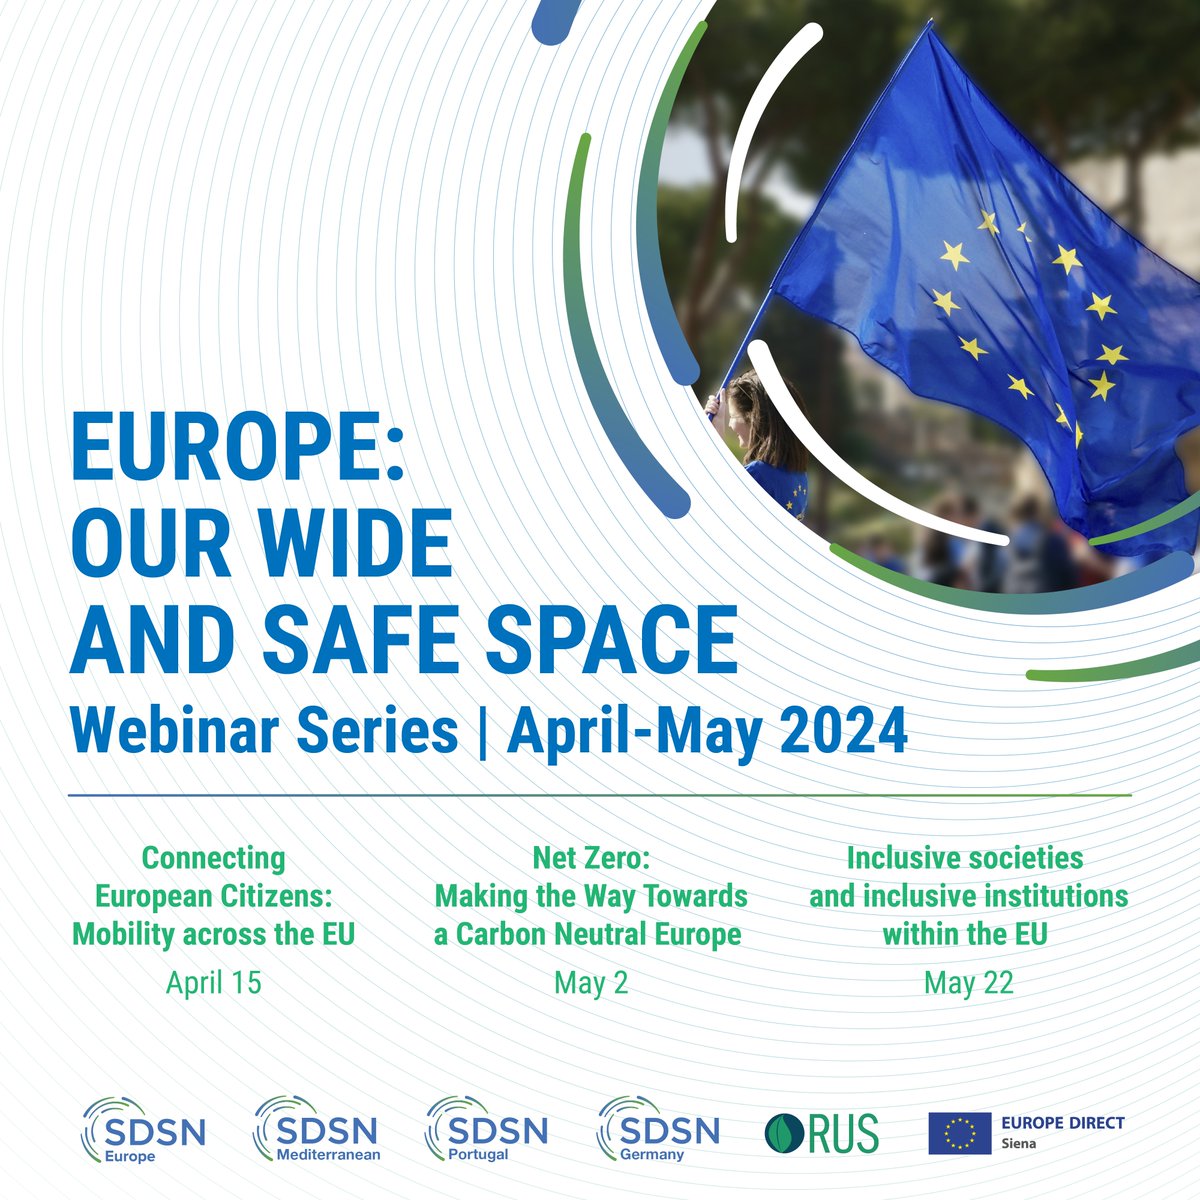 🇪🇺✨Save the dates! Don't miss out on the 'Europe: Our Wide and Safe Space' webinar series! Presented by @‌SDSN_EU, @‌SDSNmed, @‌SDSN_Portugal, and @‌SDSN_Germany, these webinars spotlight the EU's strides in sustainable development. Learn more: unsdsn.org/webinar-series… @‌UNSDSN